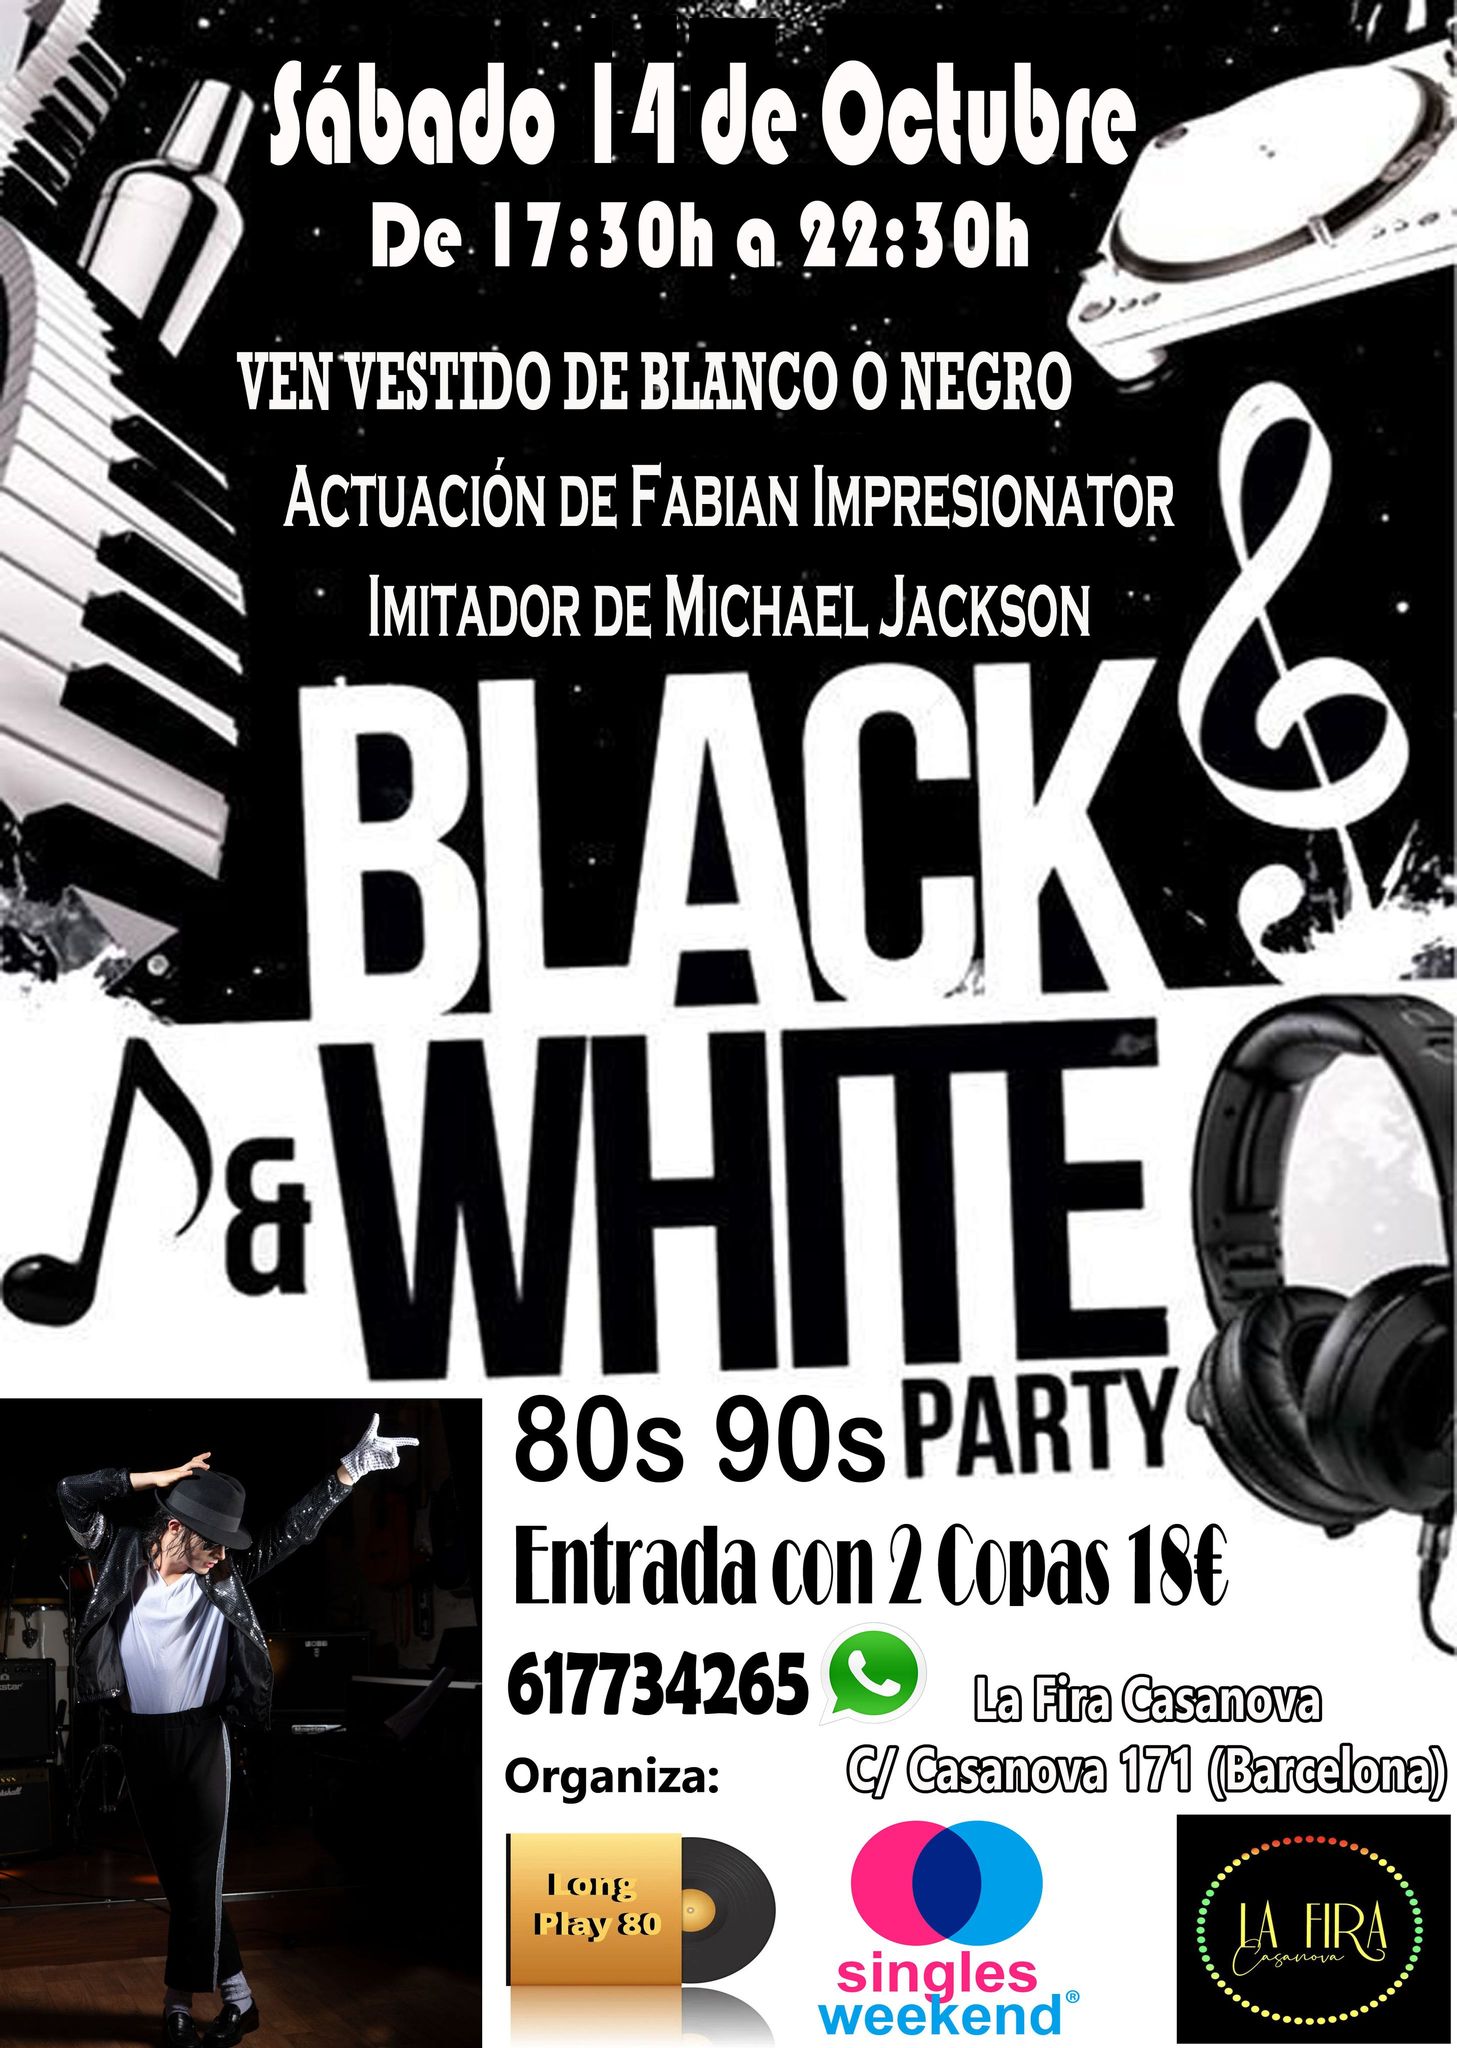 Flyer Black and White 80s 90s Party